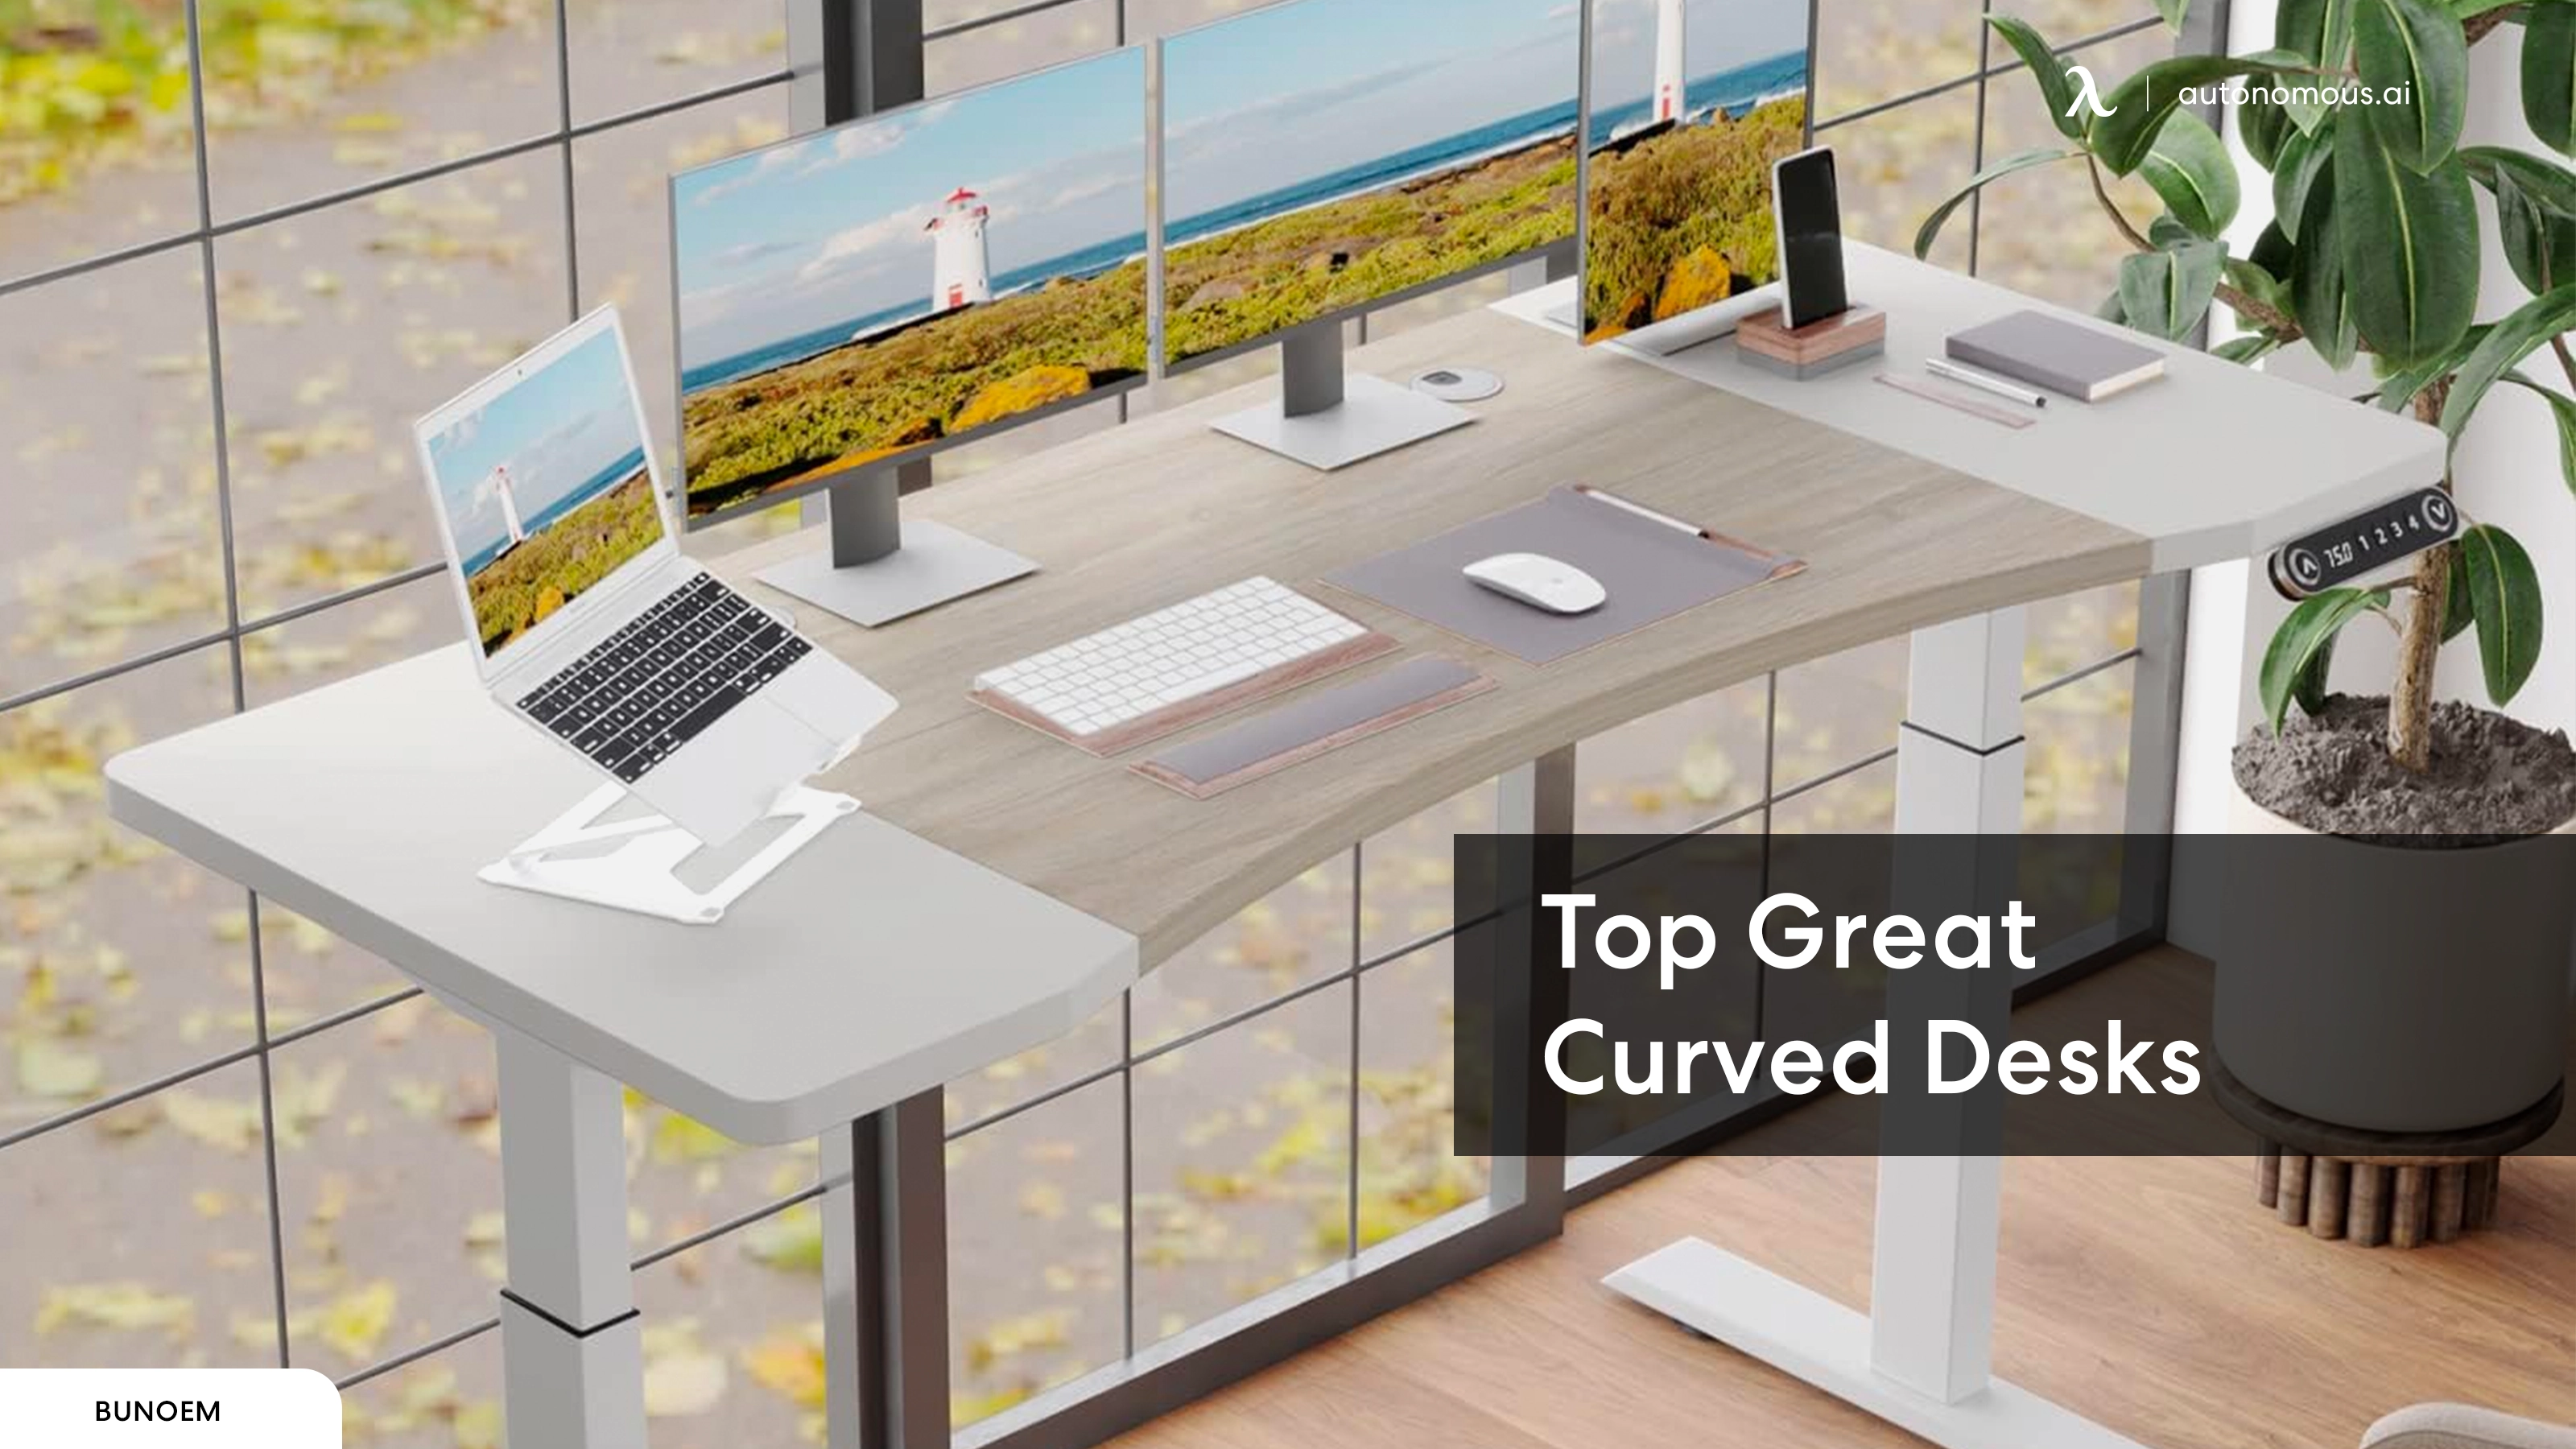 Incorporating Curved Desks in Your Workspace | 5 Great Options